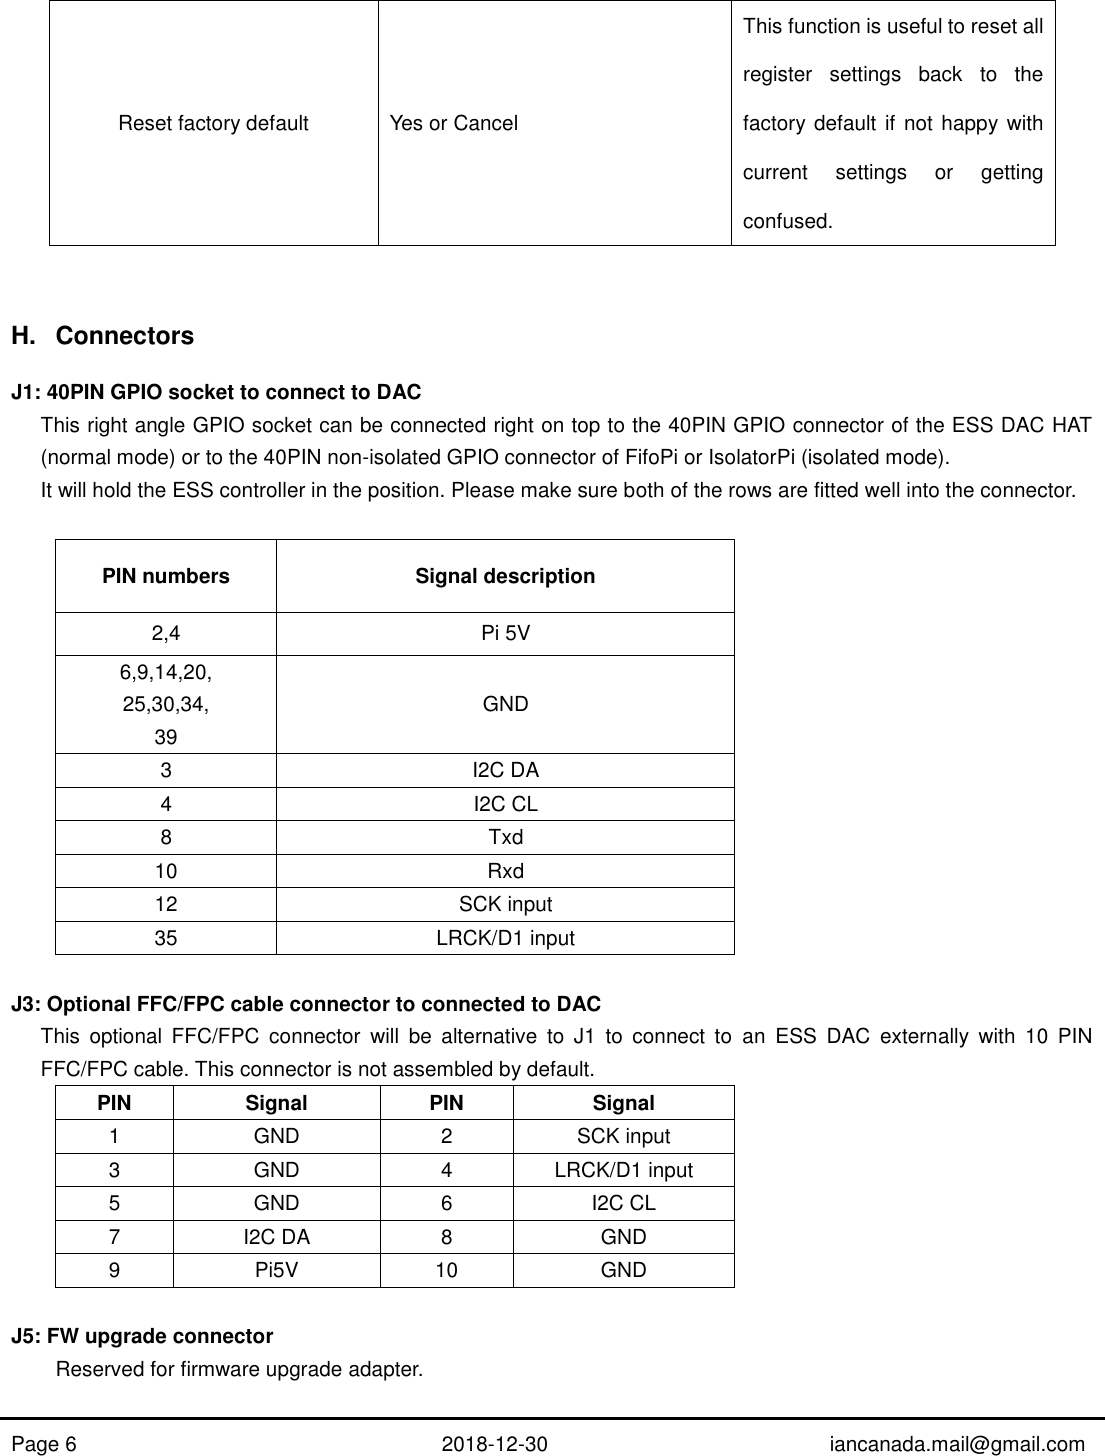 Page 6 of 11 - ESScontroller Manual